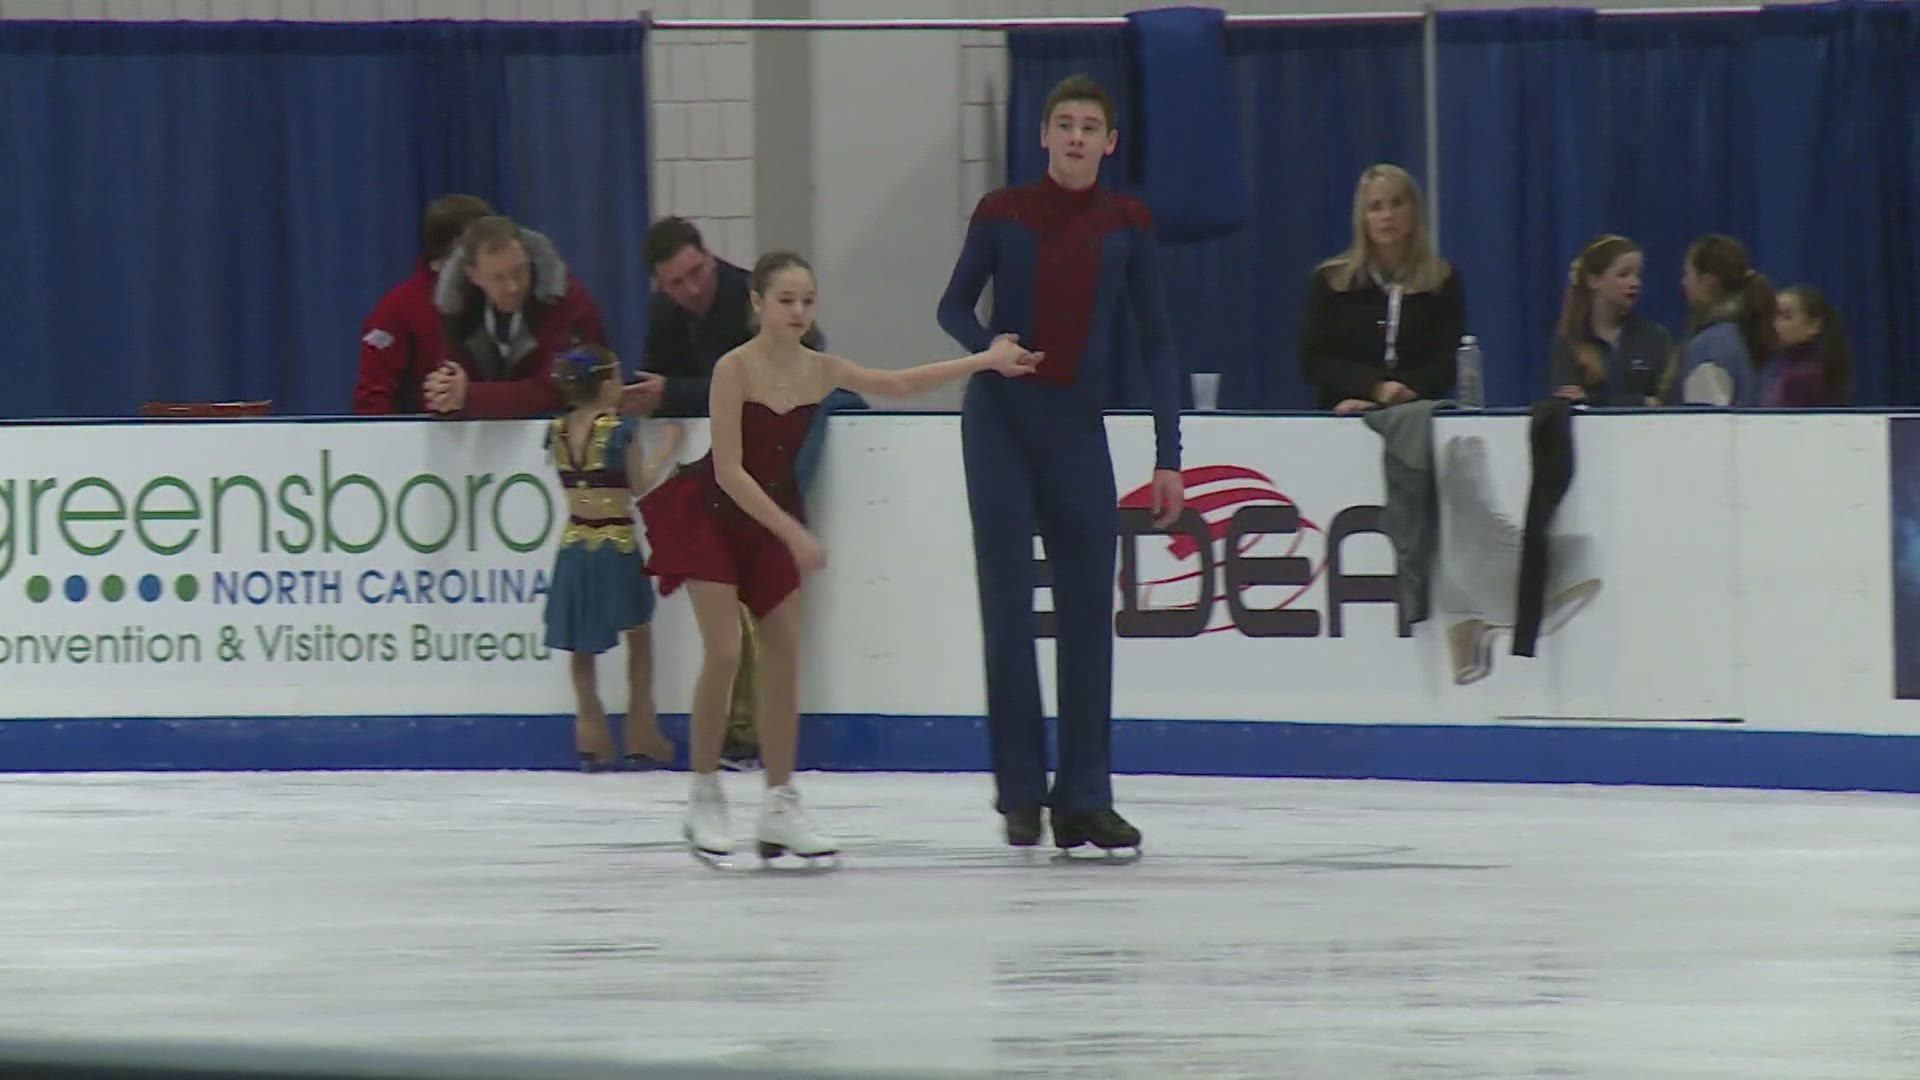 In 2015, the U.S. Figure Skating Championship came to the Greensboro Coliseum.